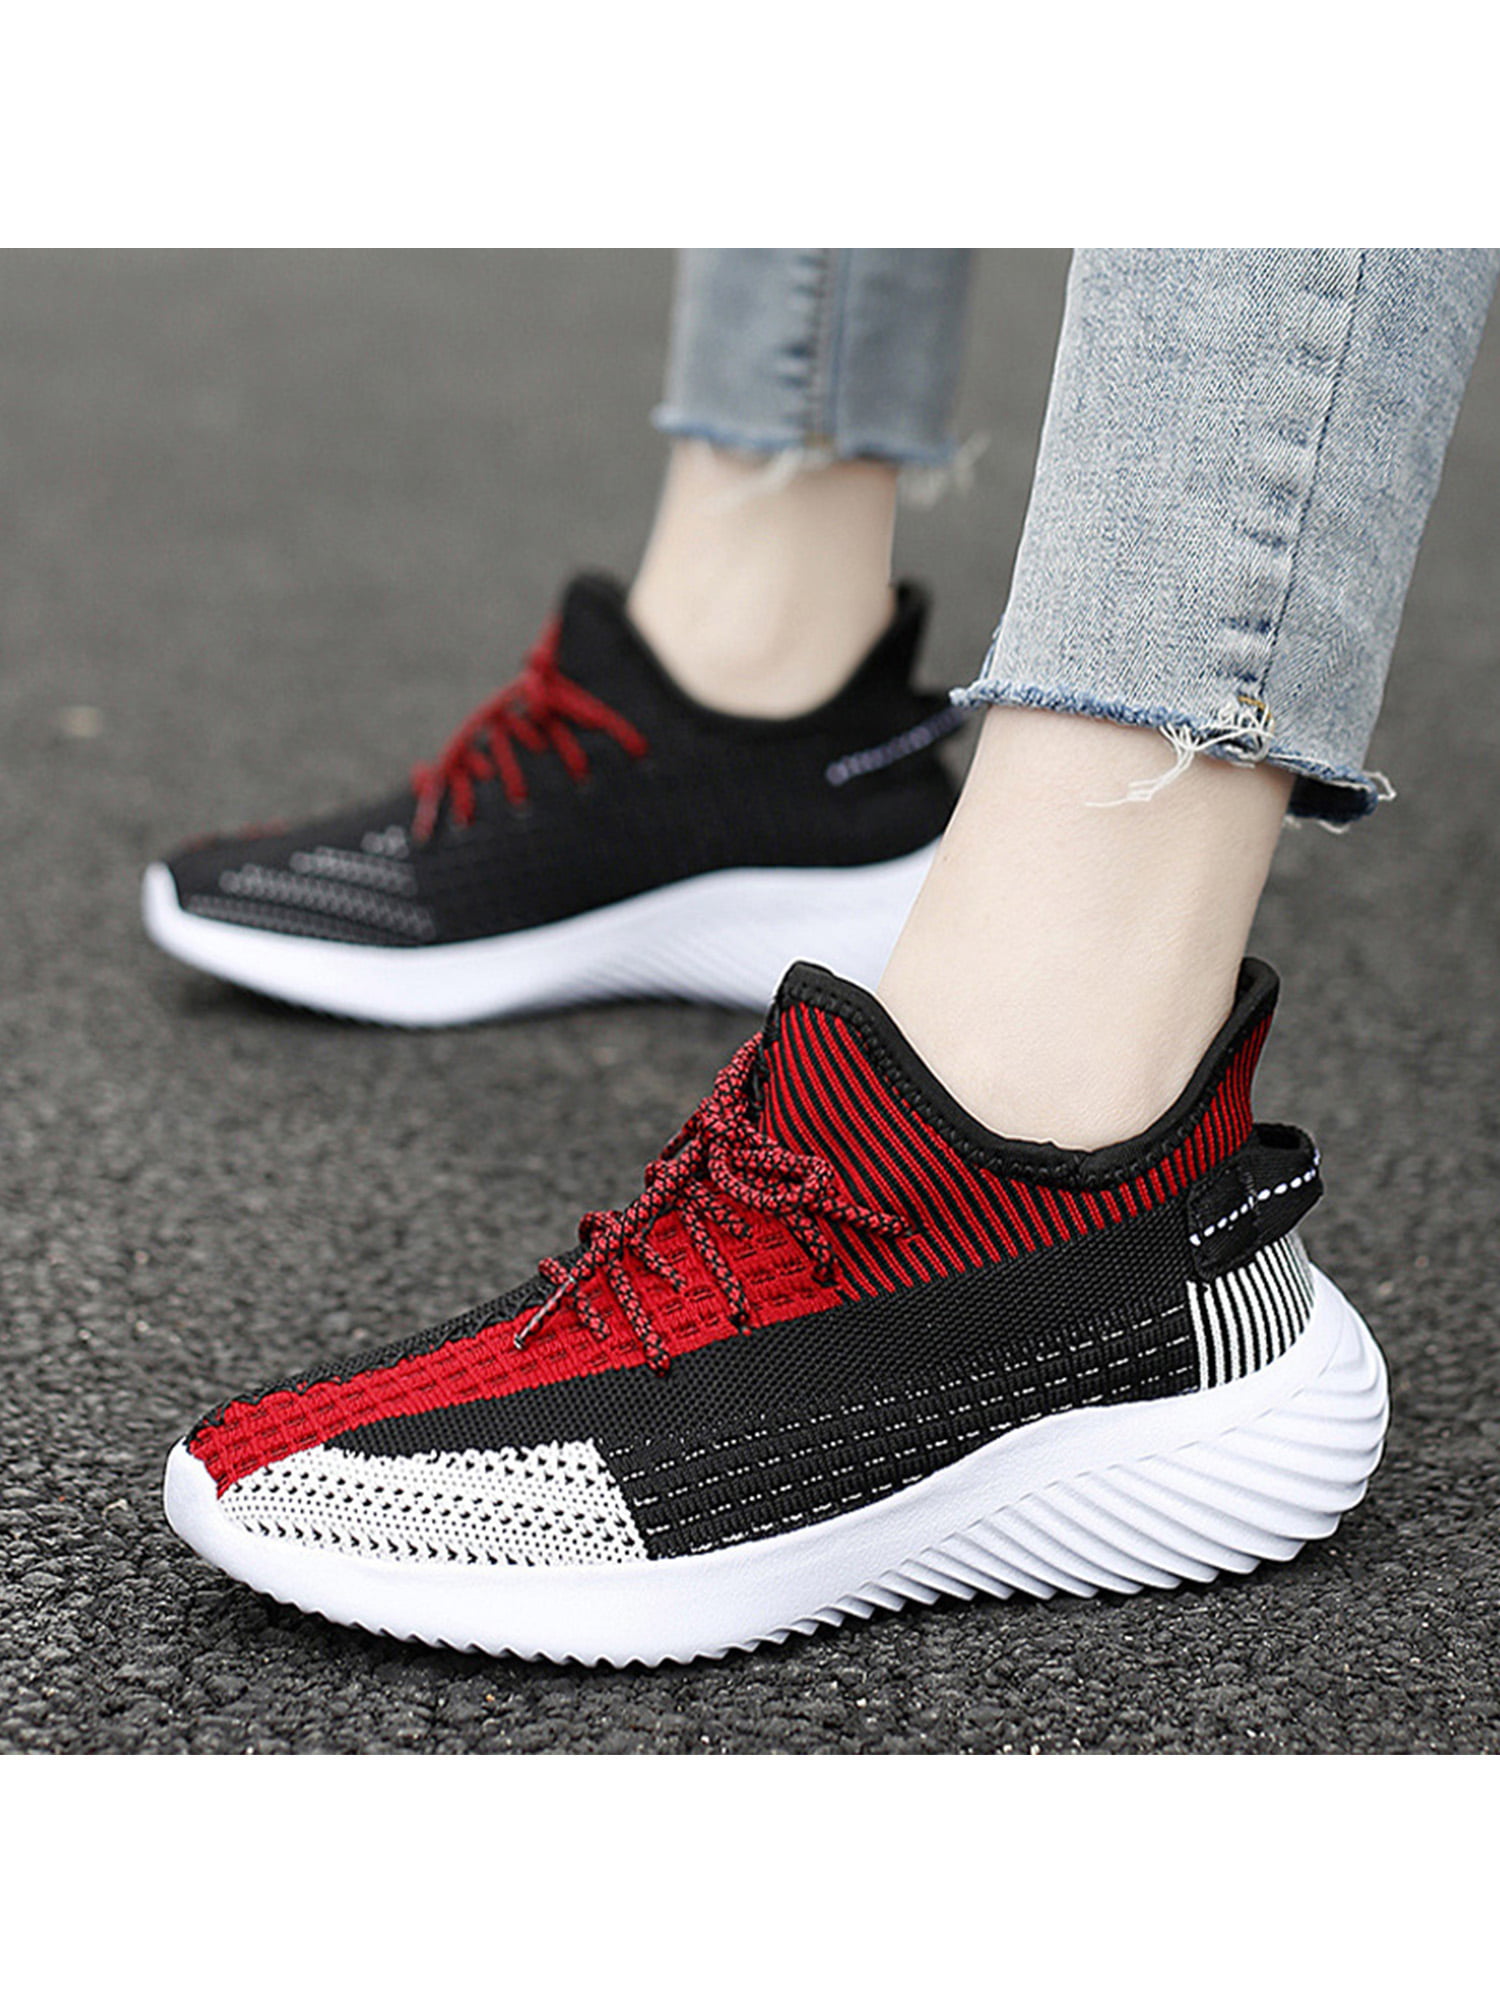 Men's Women's Fashion Sports Sneakers Breathable Athletic Casual Running Shoes 